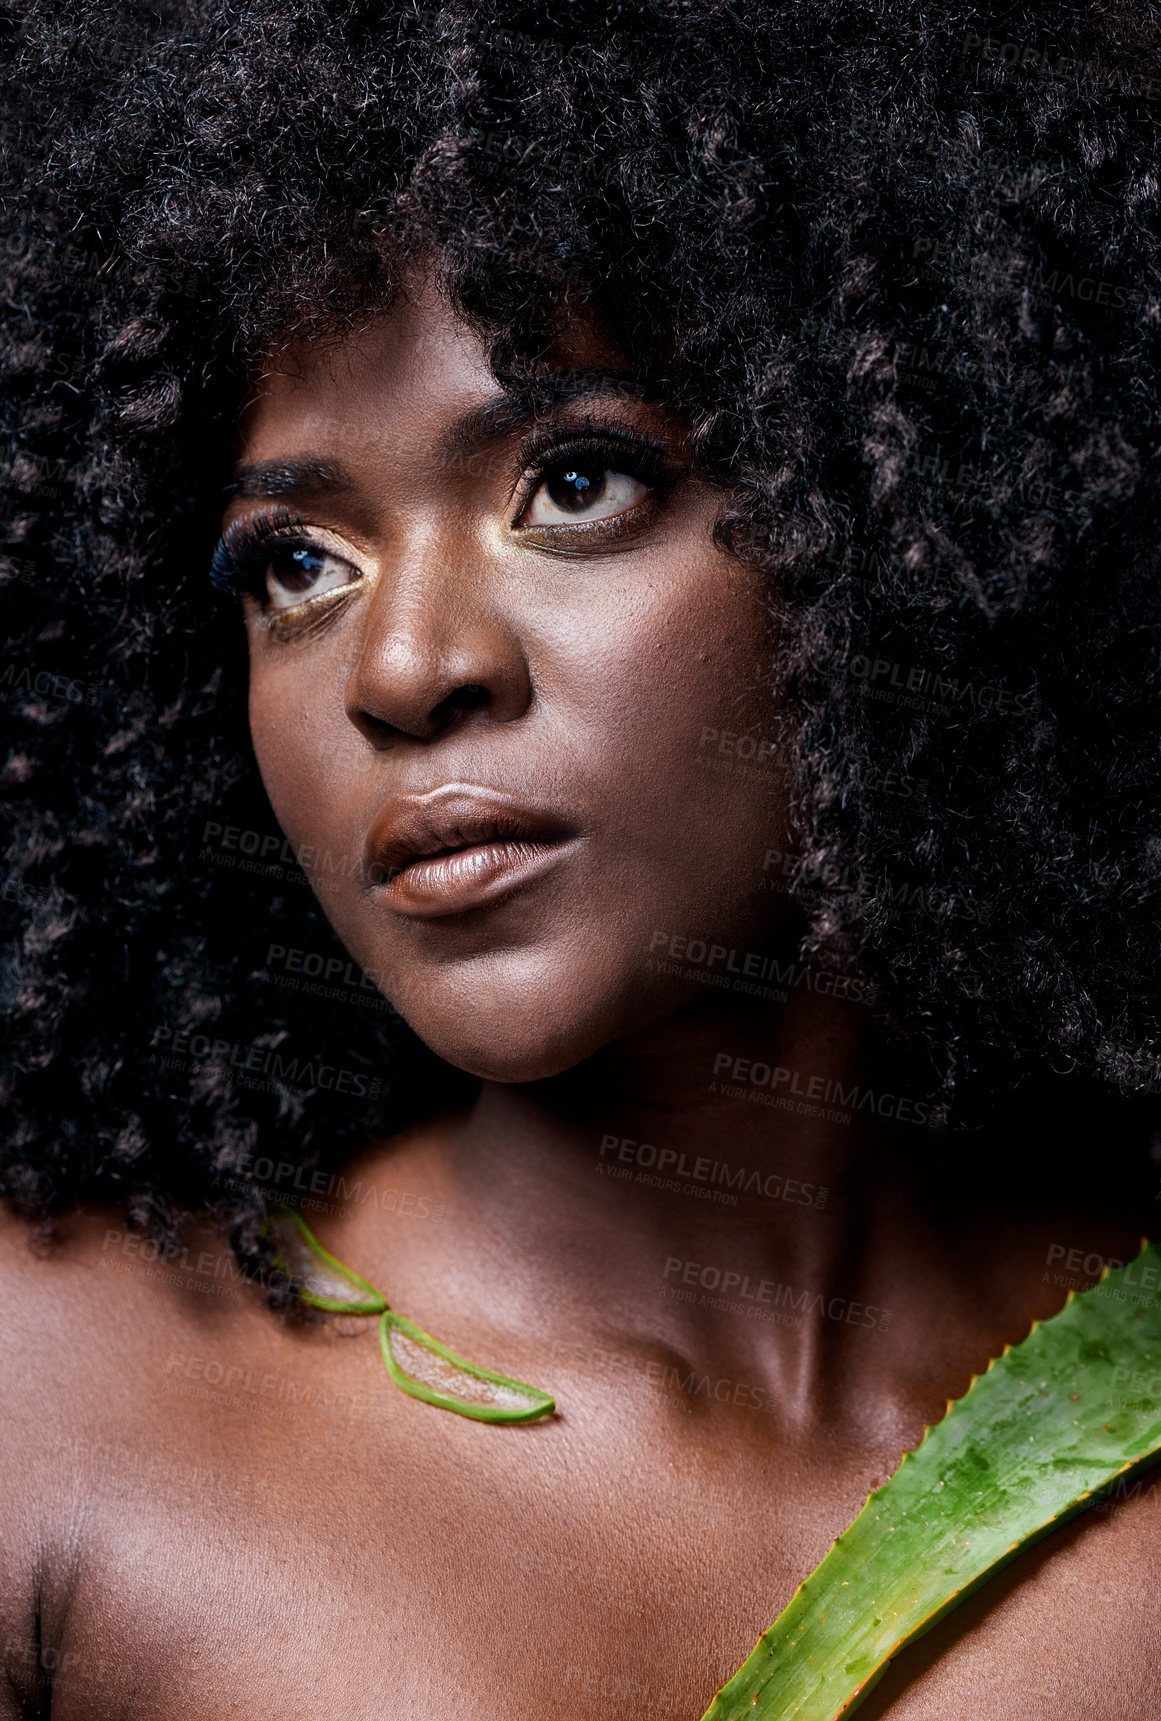 Buy stock photo Shot of a beautiful young woman posing with an aloe vera plant against her skin